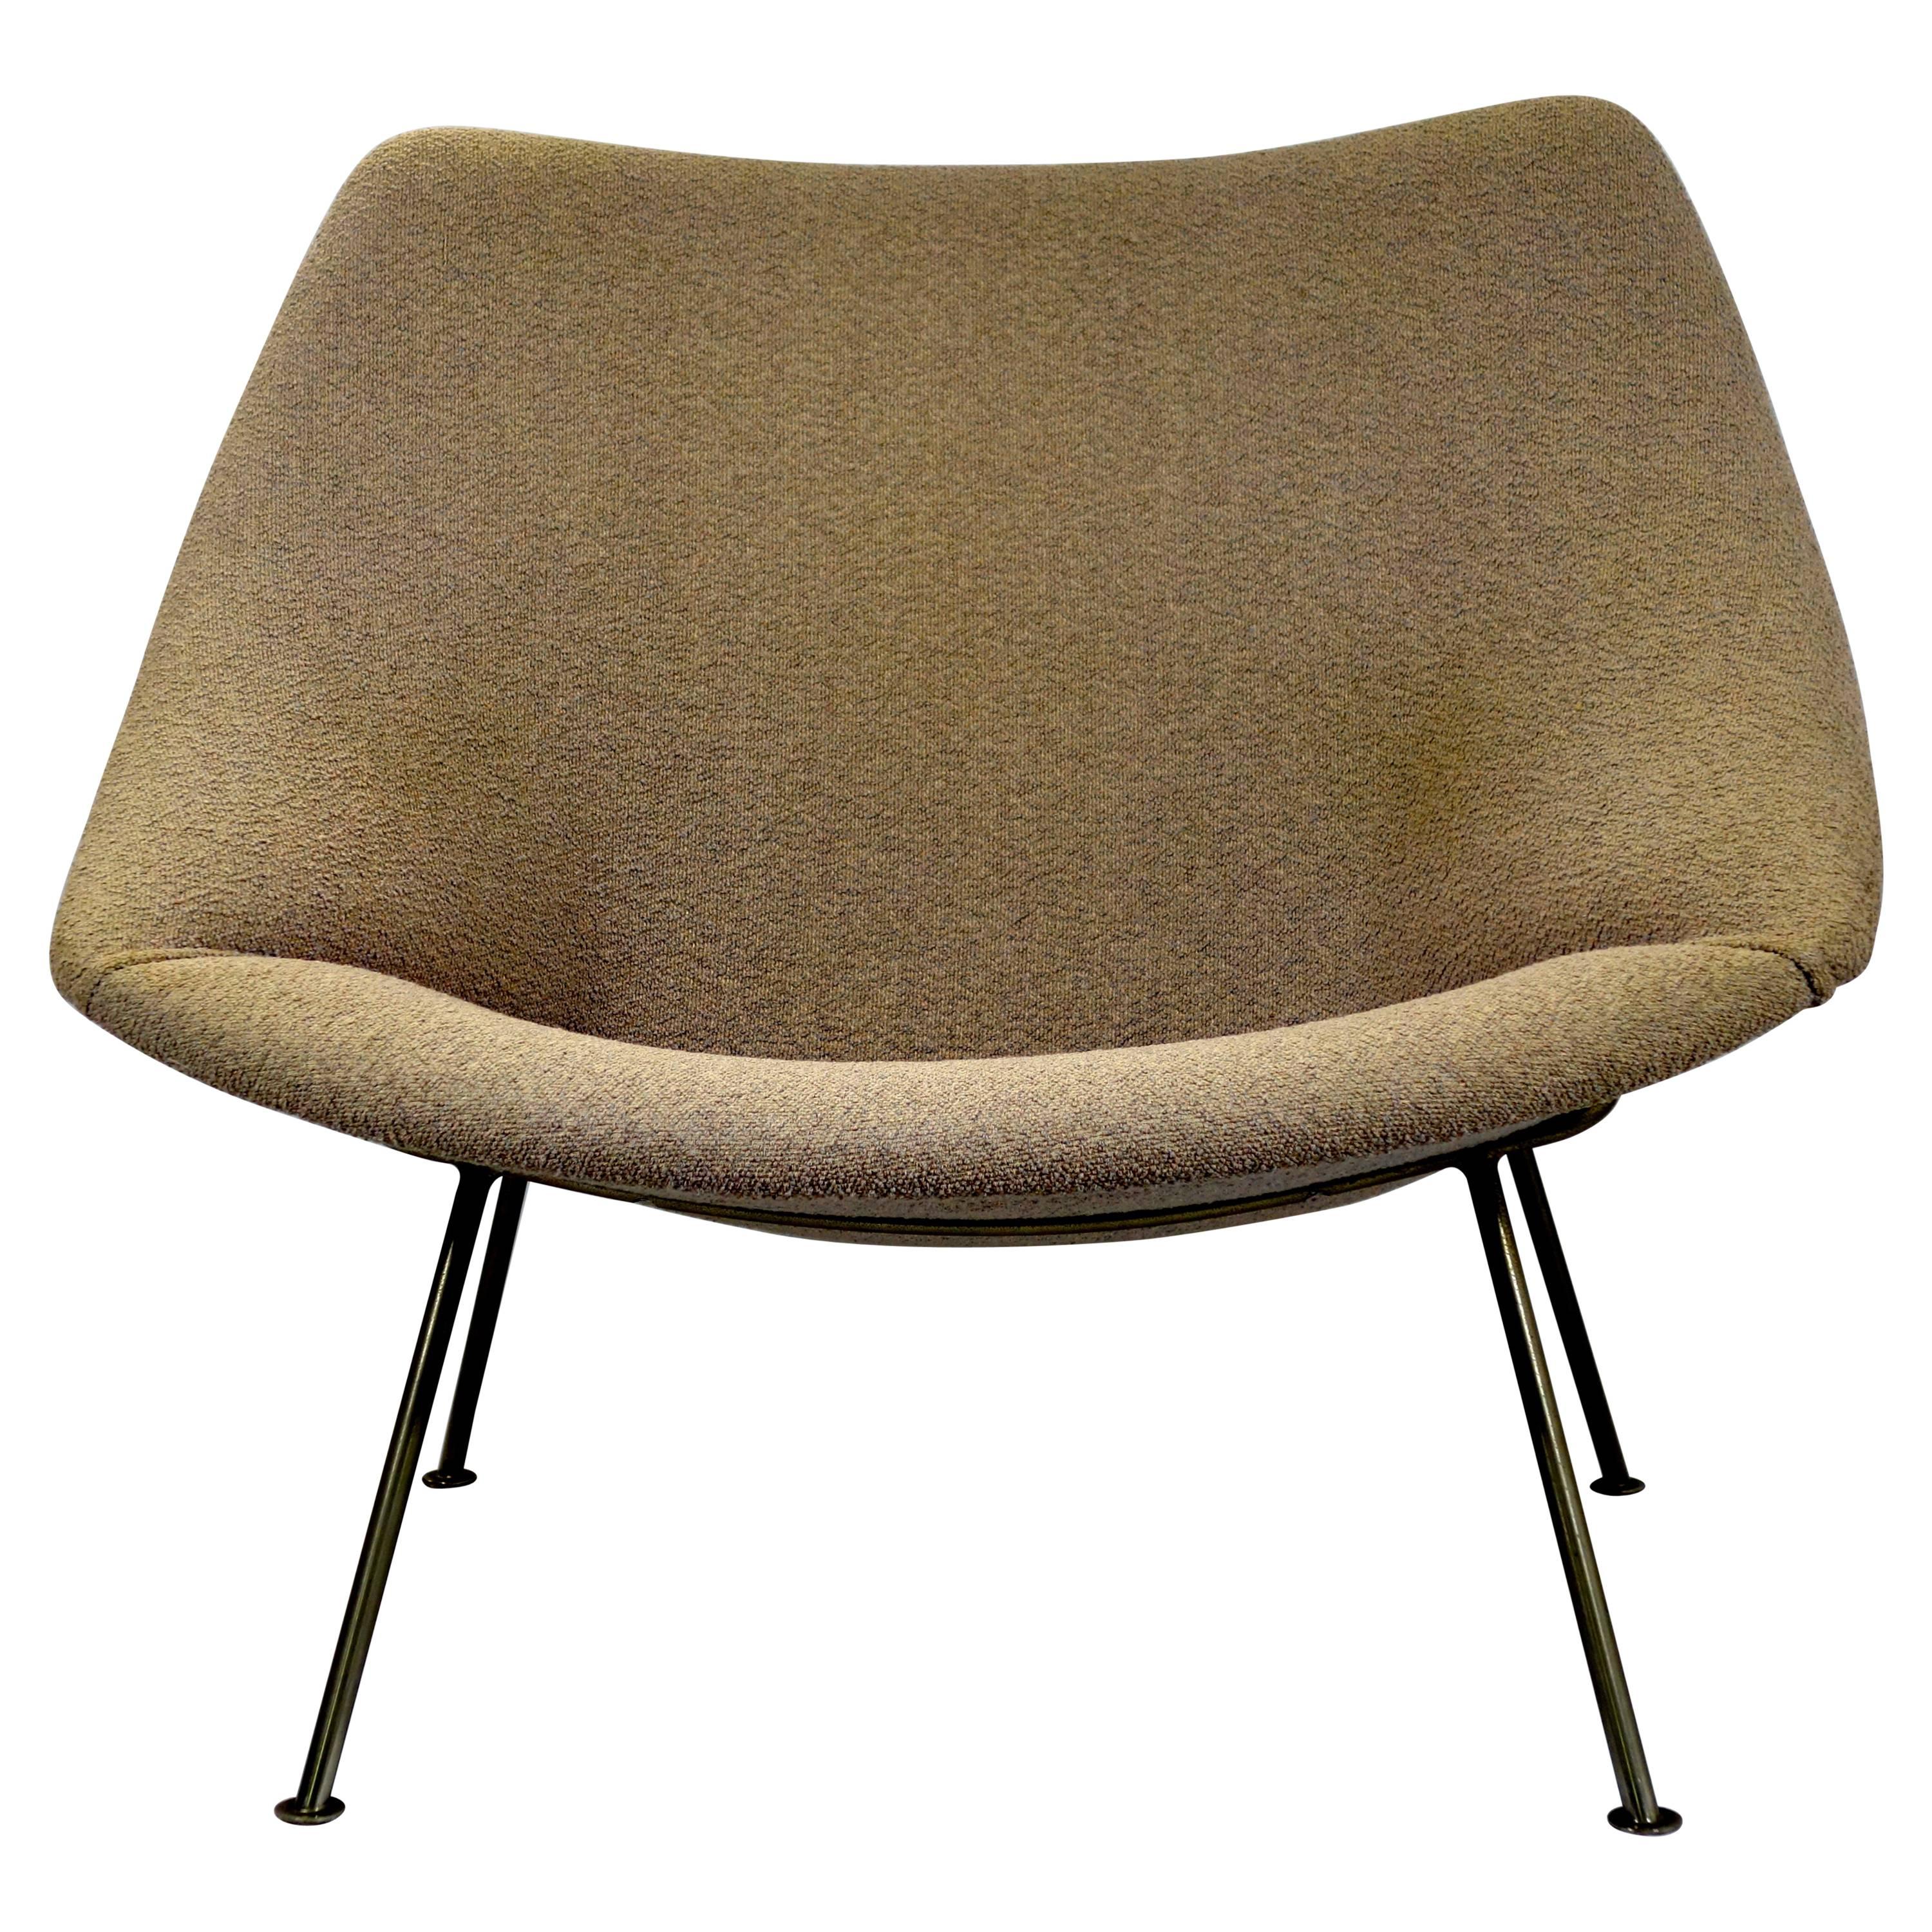 Midcentury Modern Easy Chair Oyster designed by Pierre Paulin for Artifort